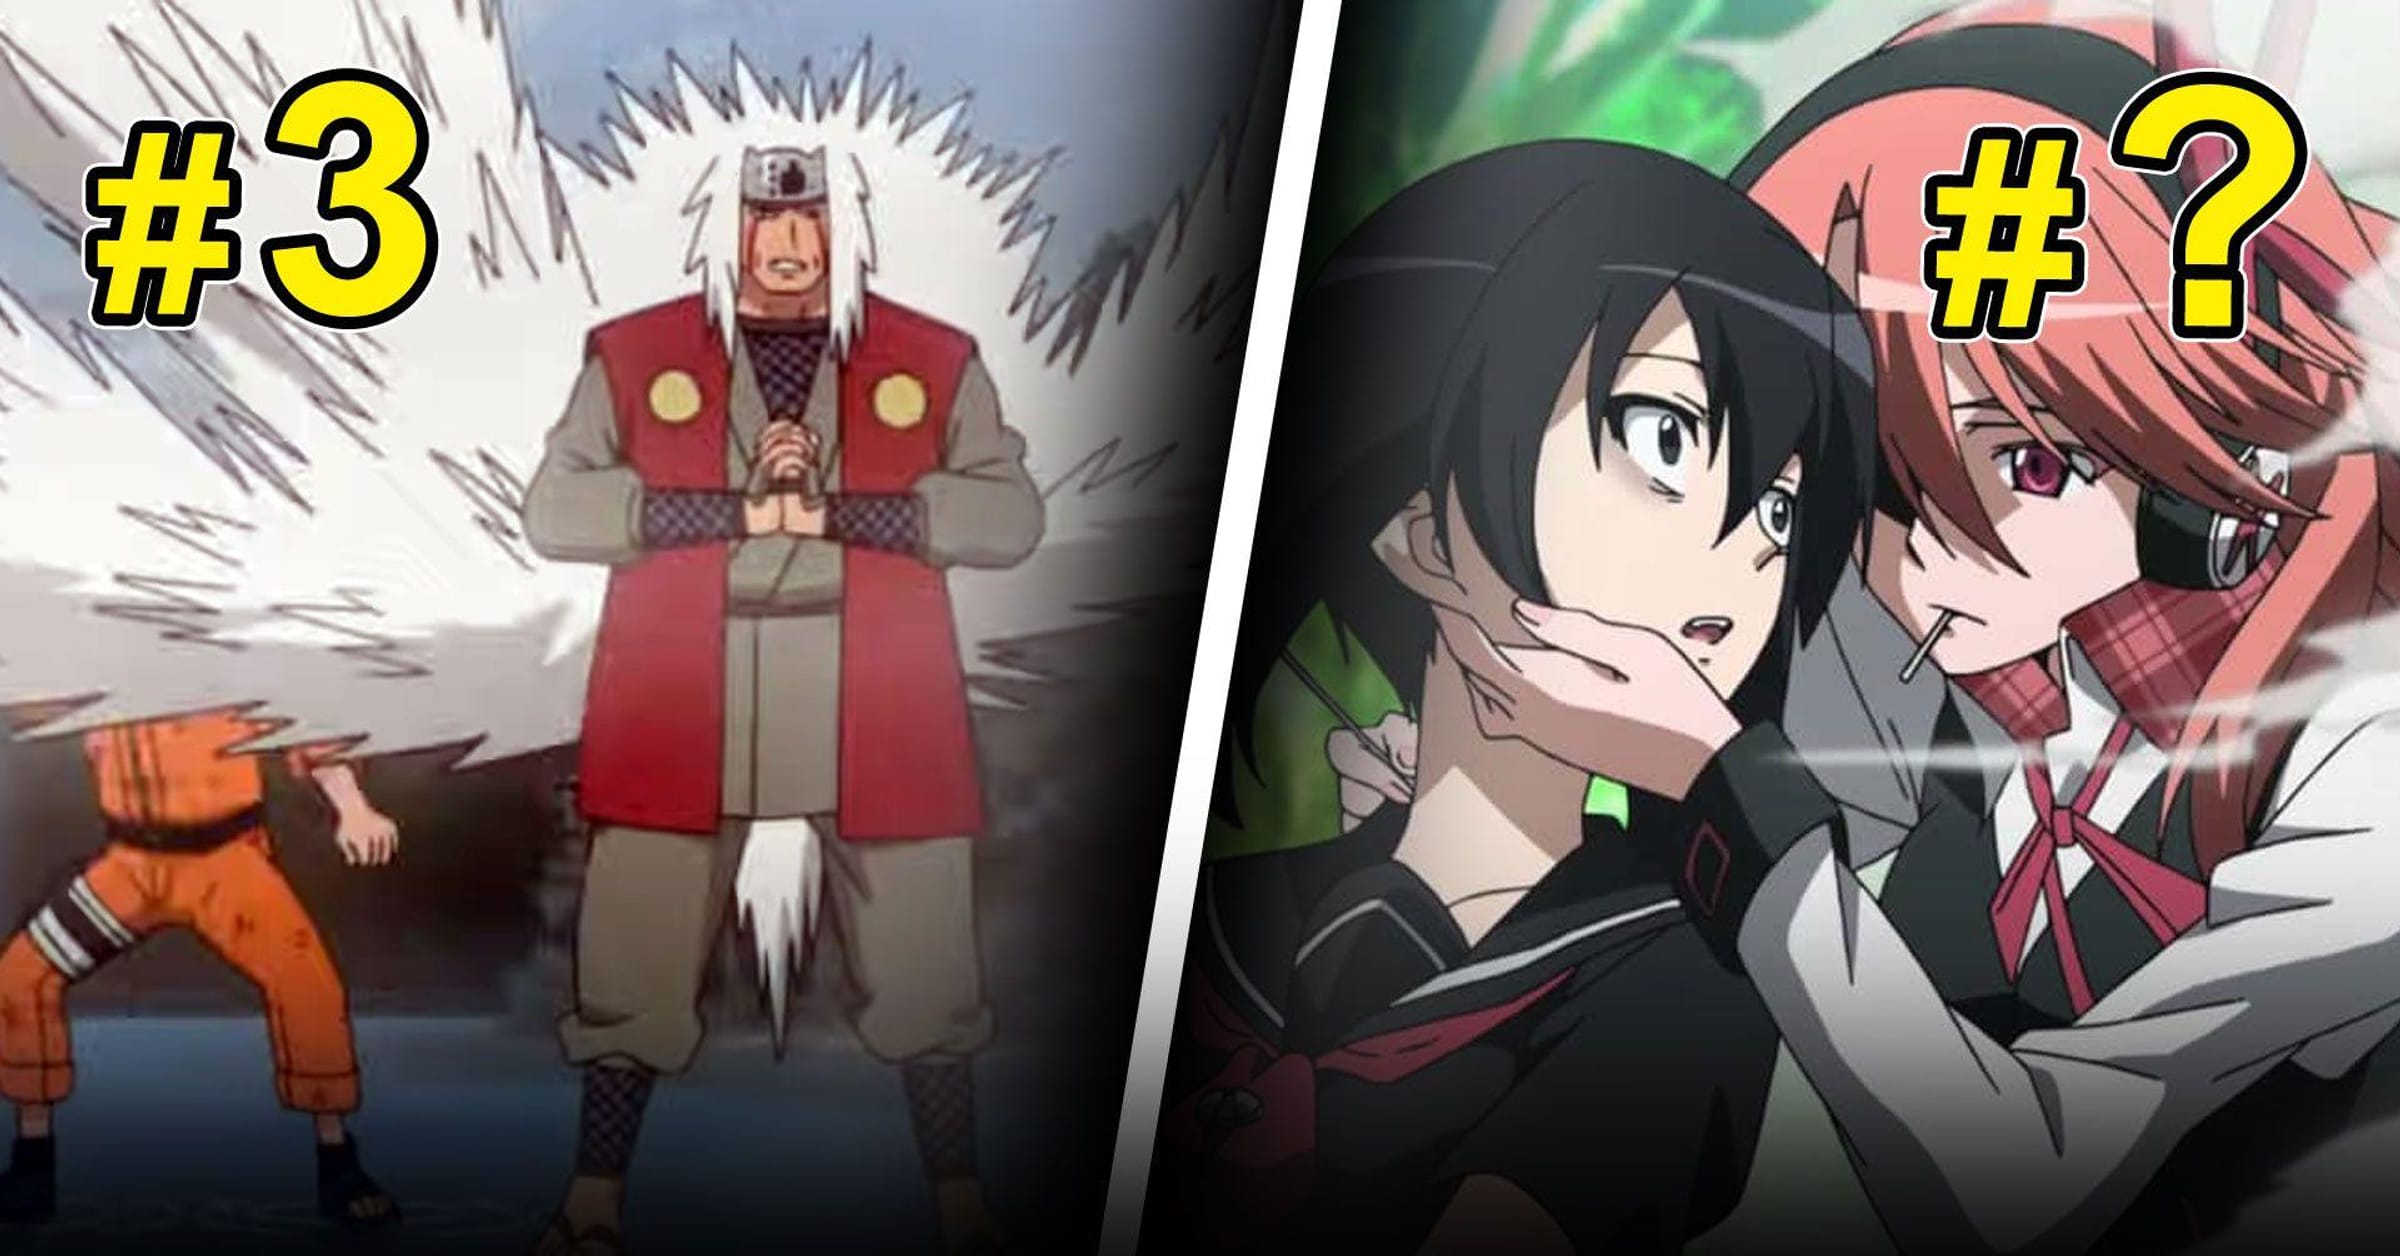 Akame Ga Kill: 10 Best Quotes From The Anime